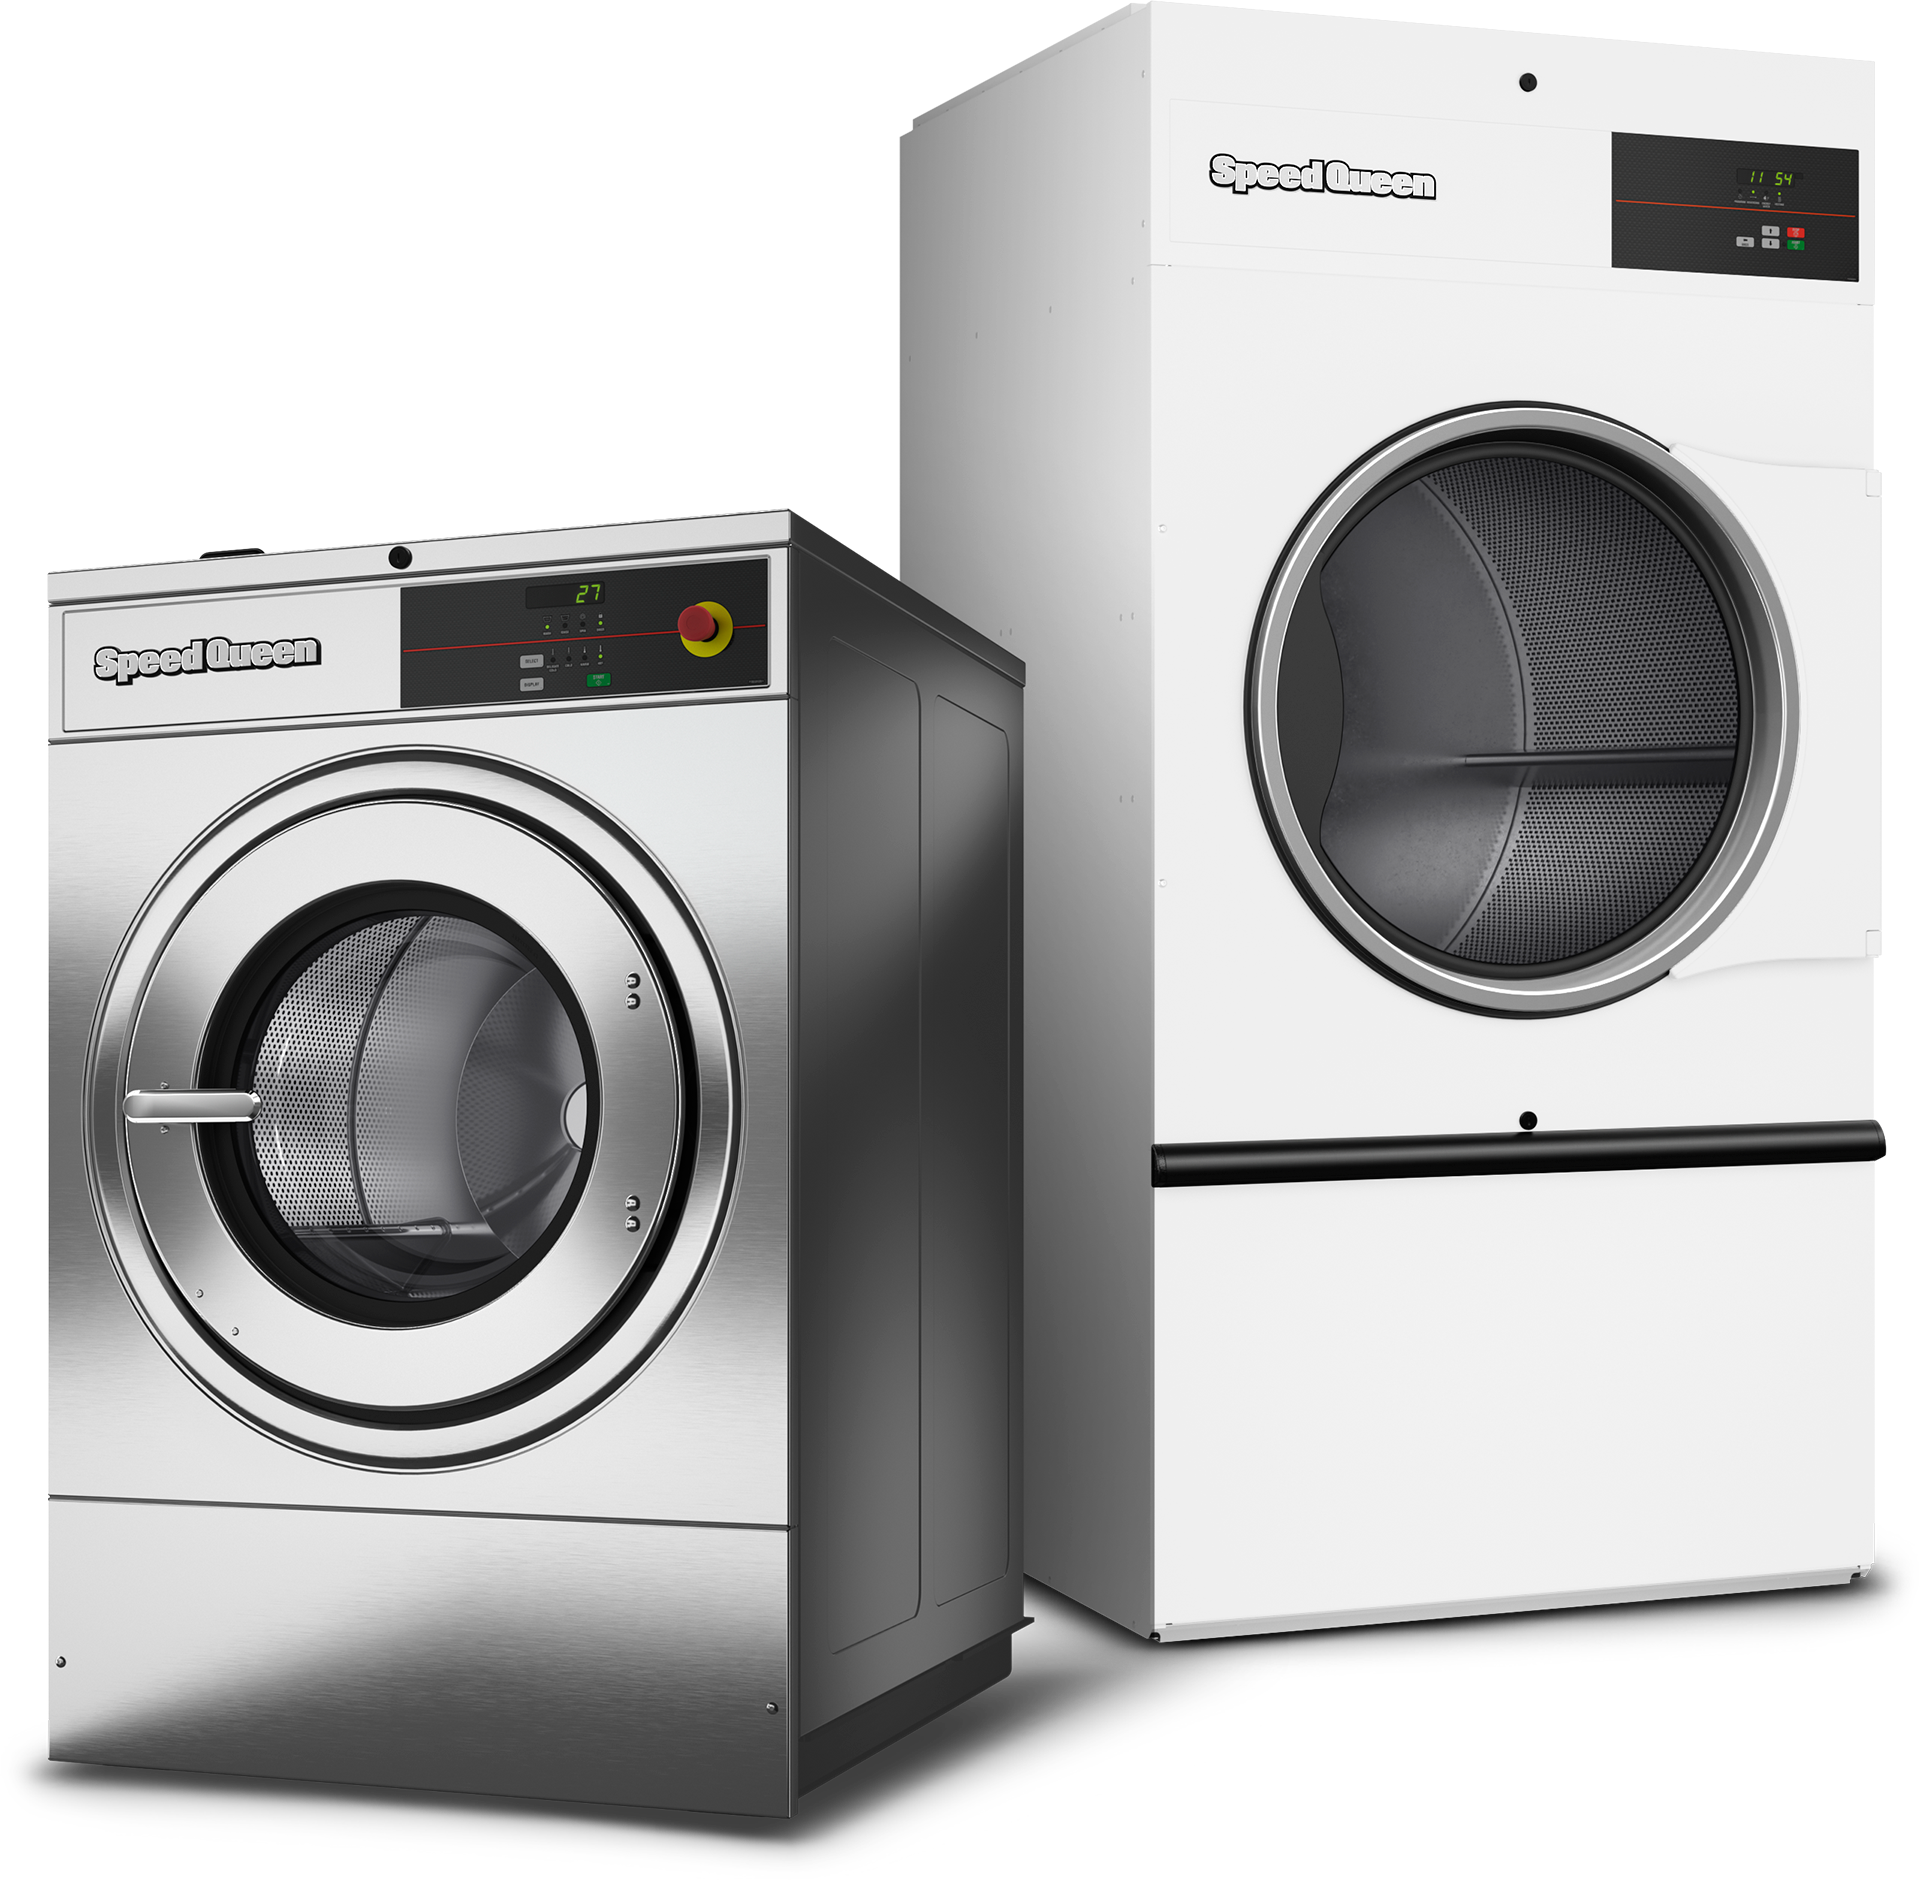 Speed Queen Commercial Commercial Laundry, Washers and Dryers